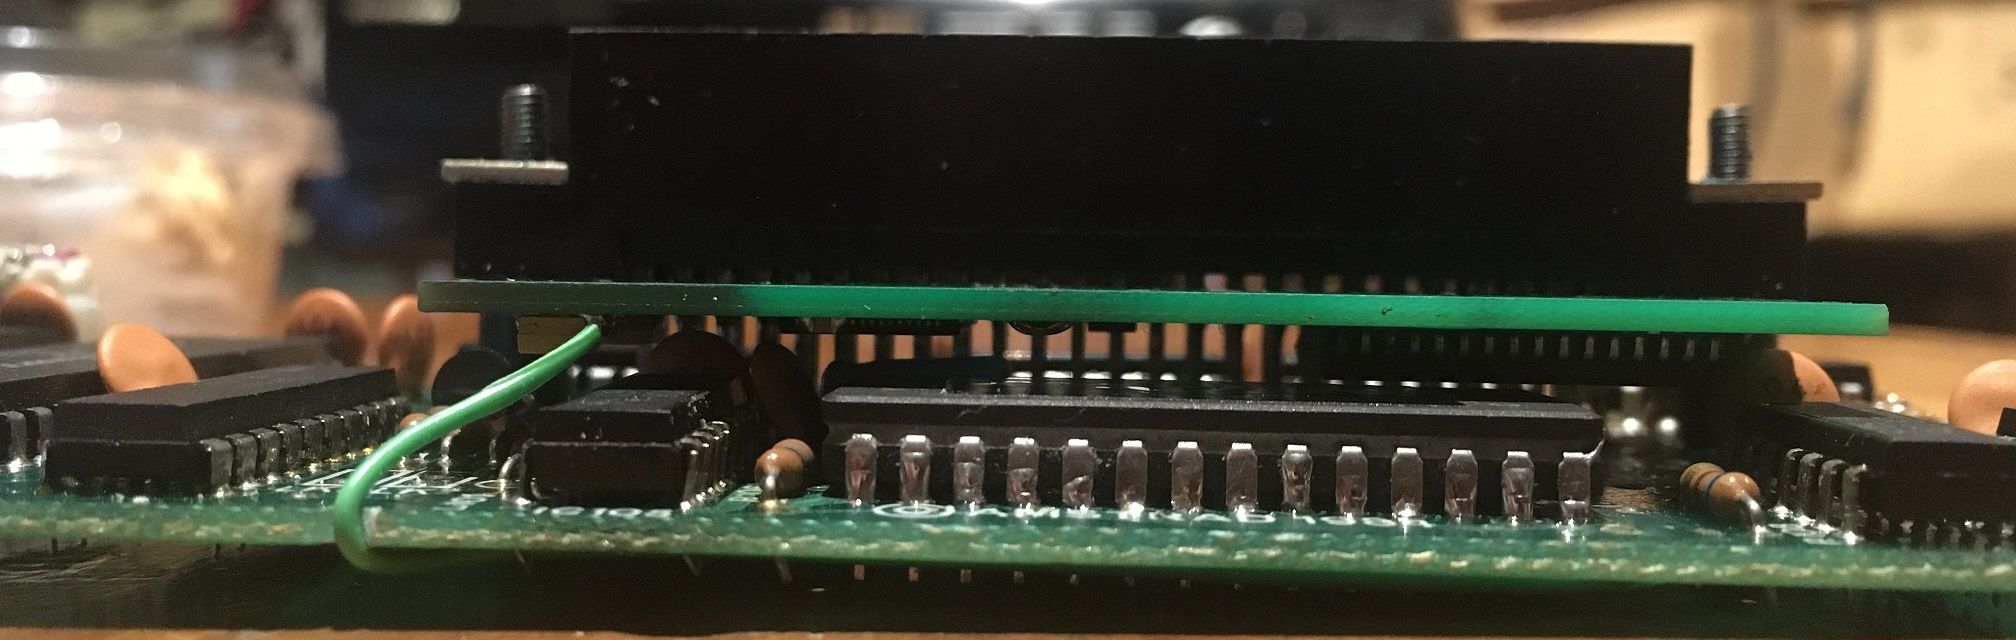 side of the modded Amstrad CPC DDI-1